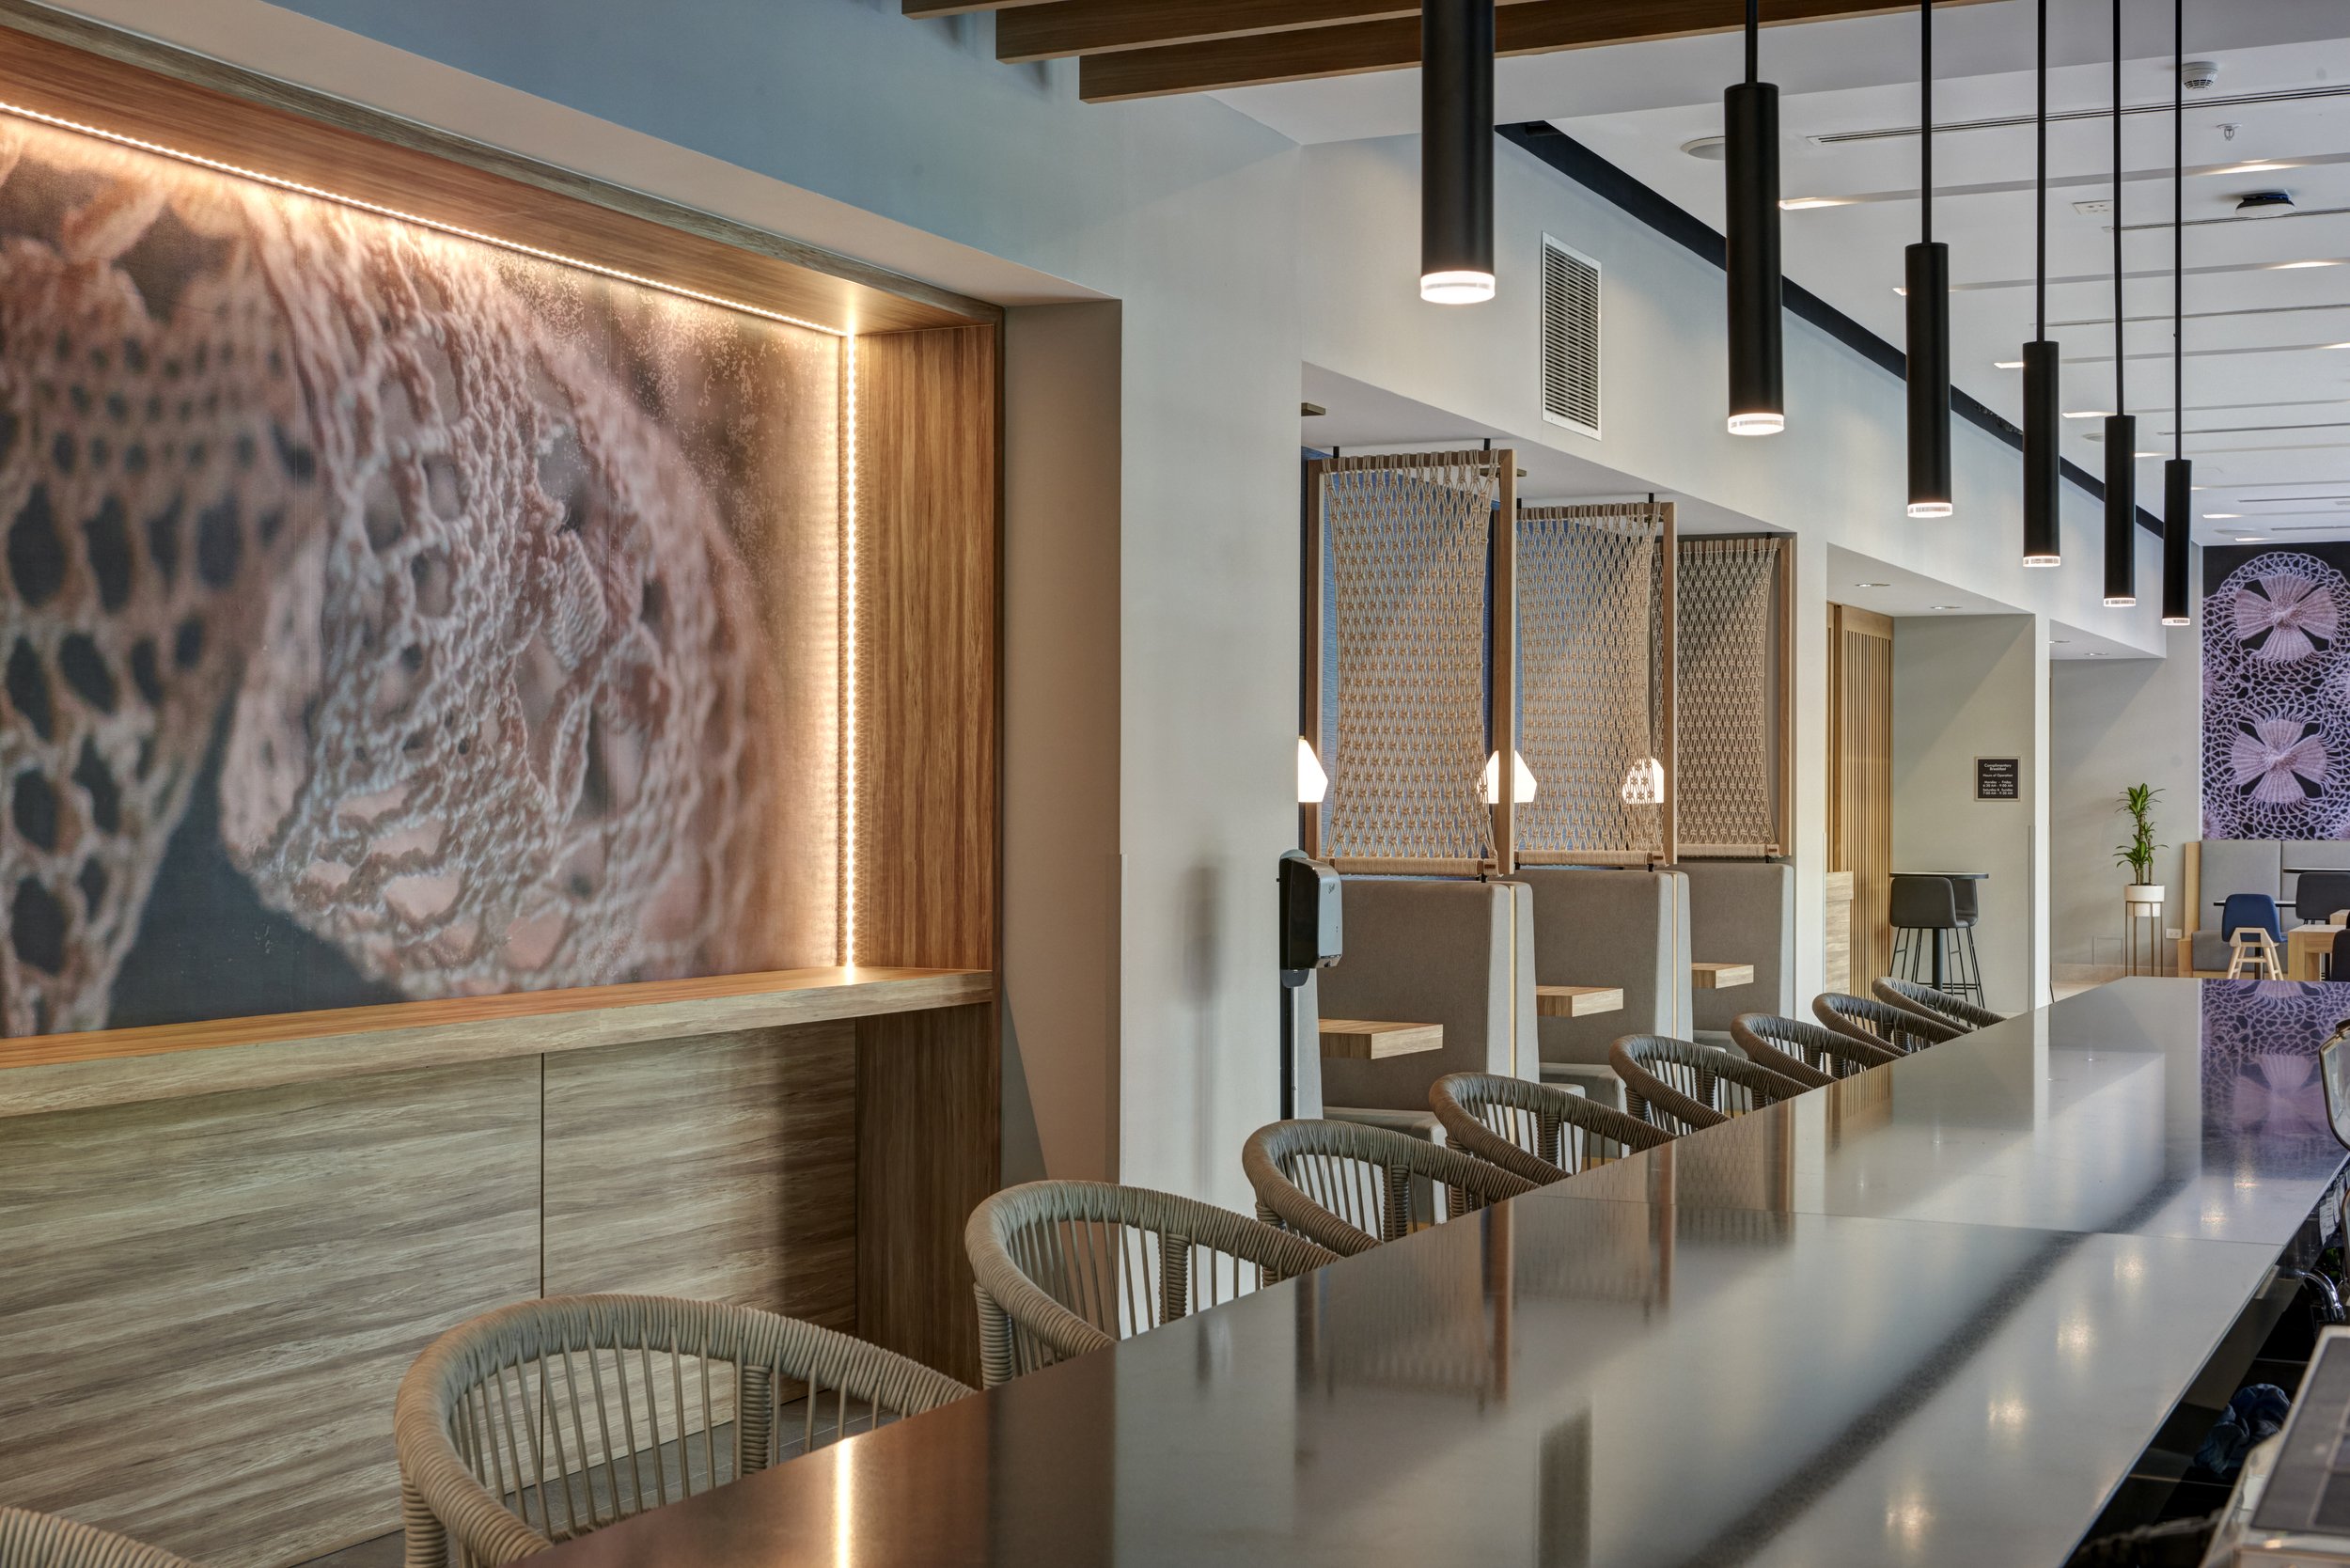  Indoor bar of the Residence Inn by Marriott hospitality project. 